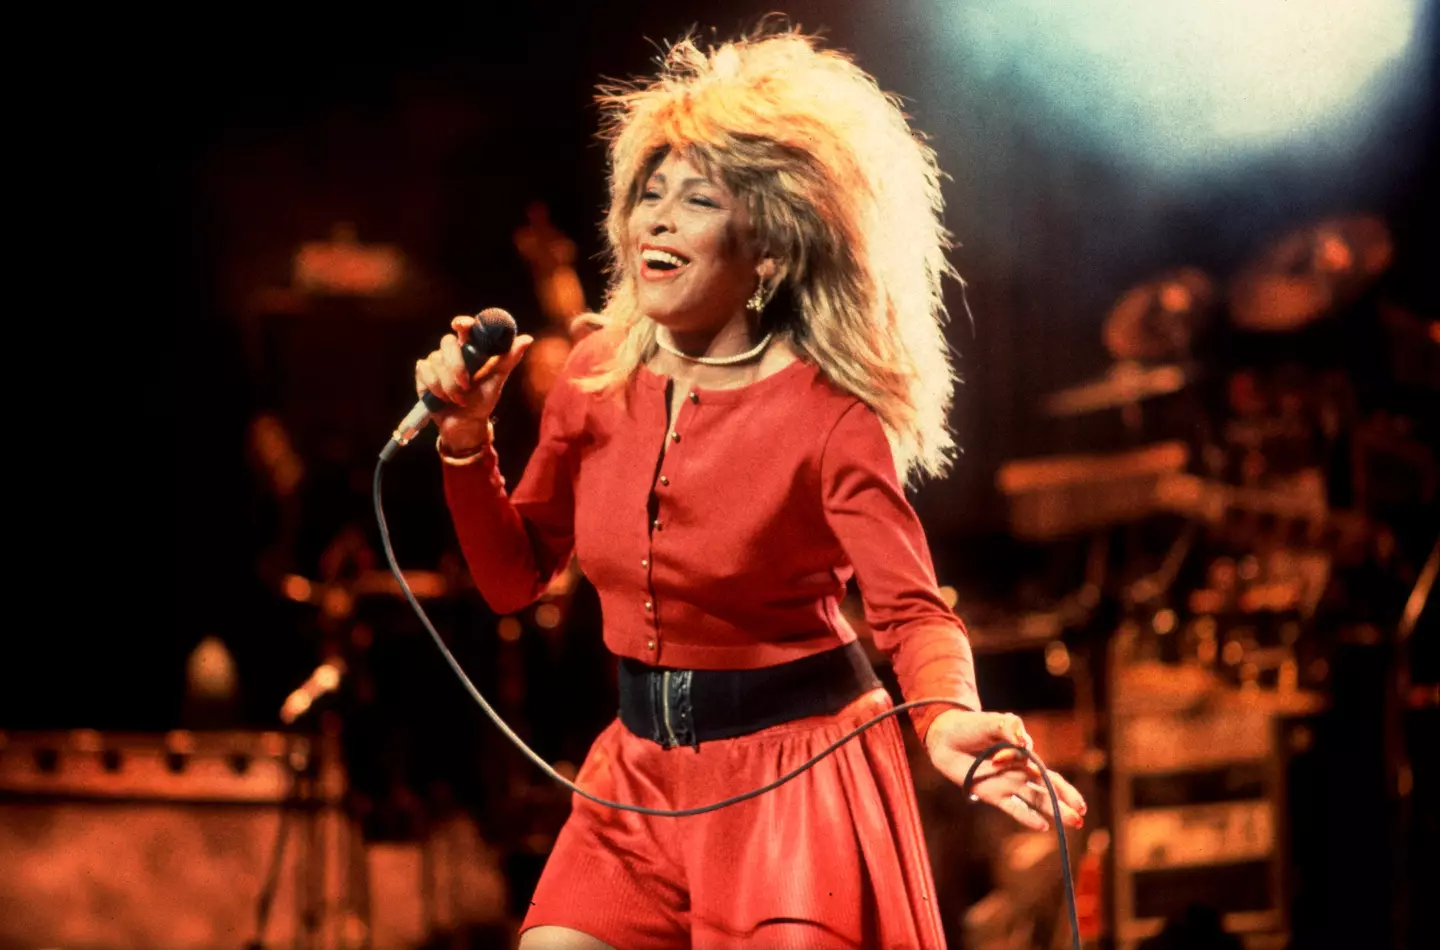 We lost legendary singer Tina Turner this year.